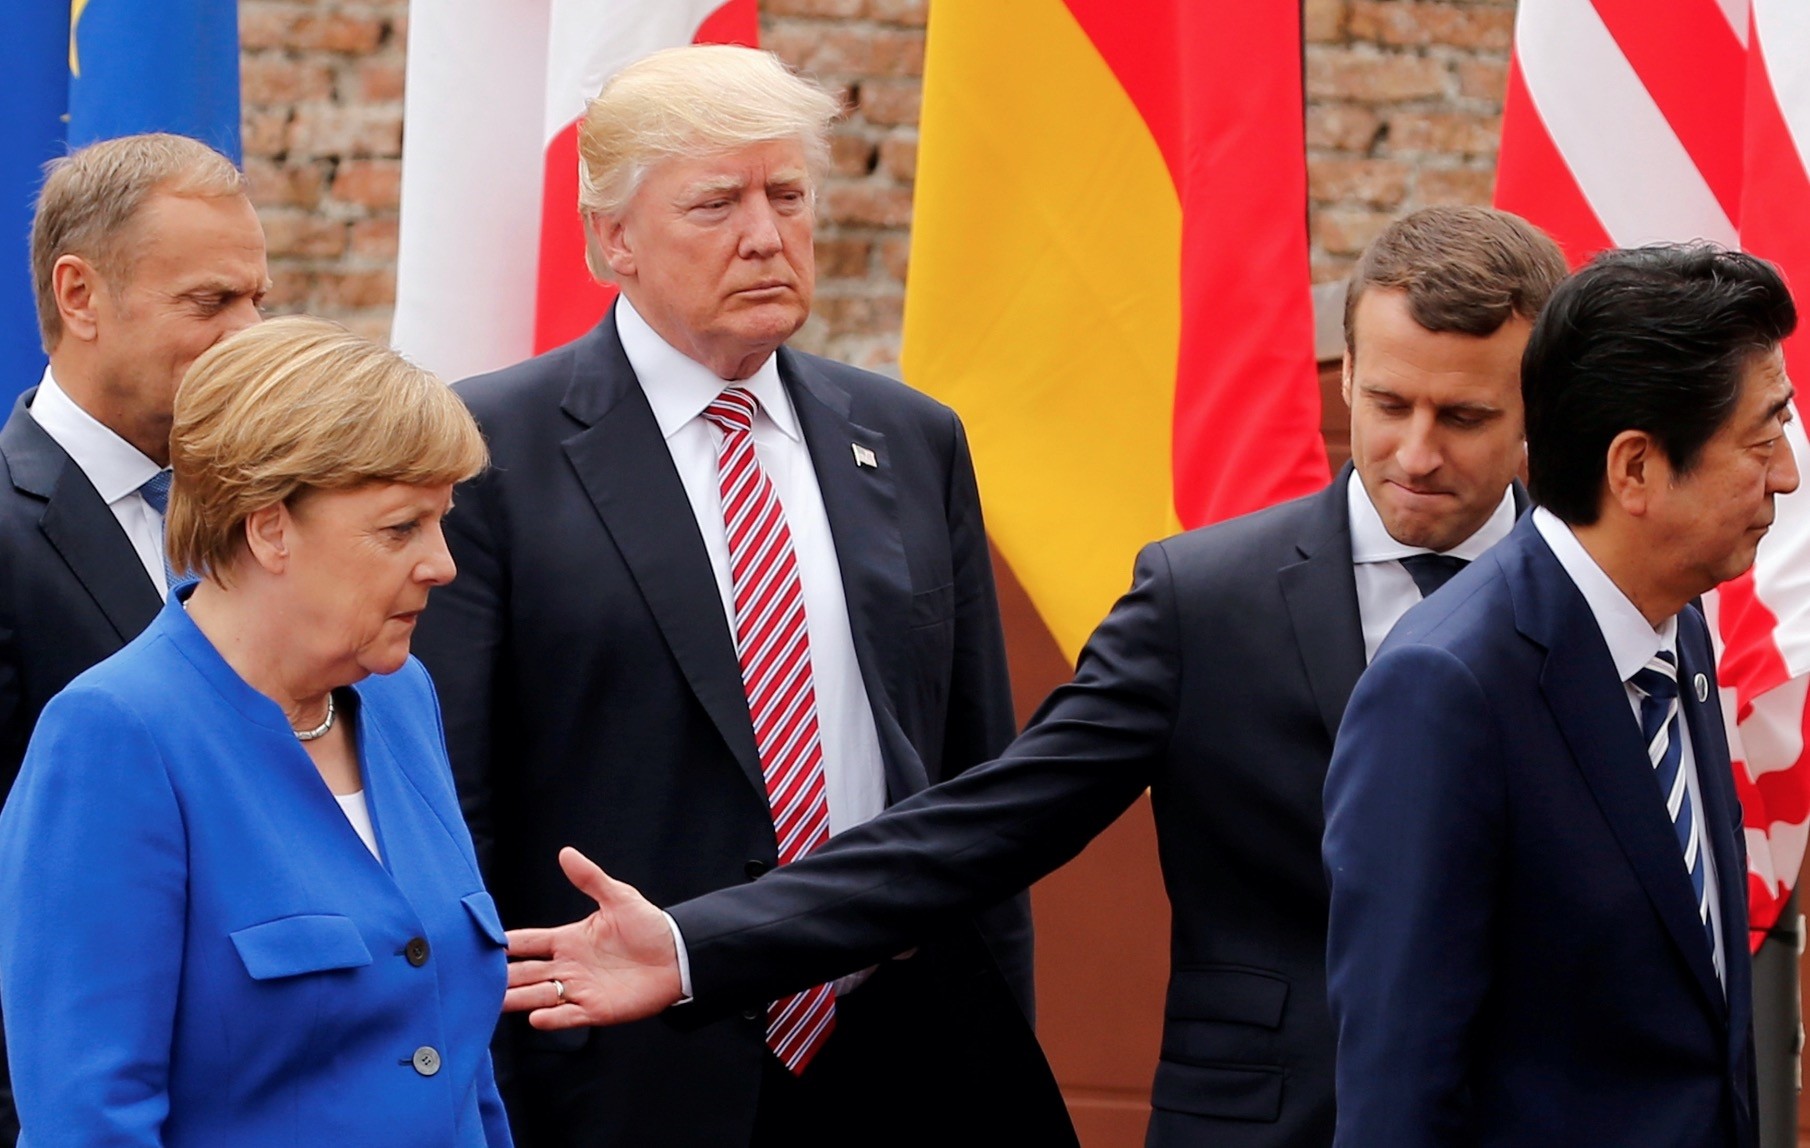 (From left to right) European Council President Donald Tusk, German Chancellor Angela Merkel, U.S. President Donald Trump, French President Emmanuel Macron and Japanese Prime Minister Shinzo Abe after a group photo during the G7 Summit